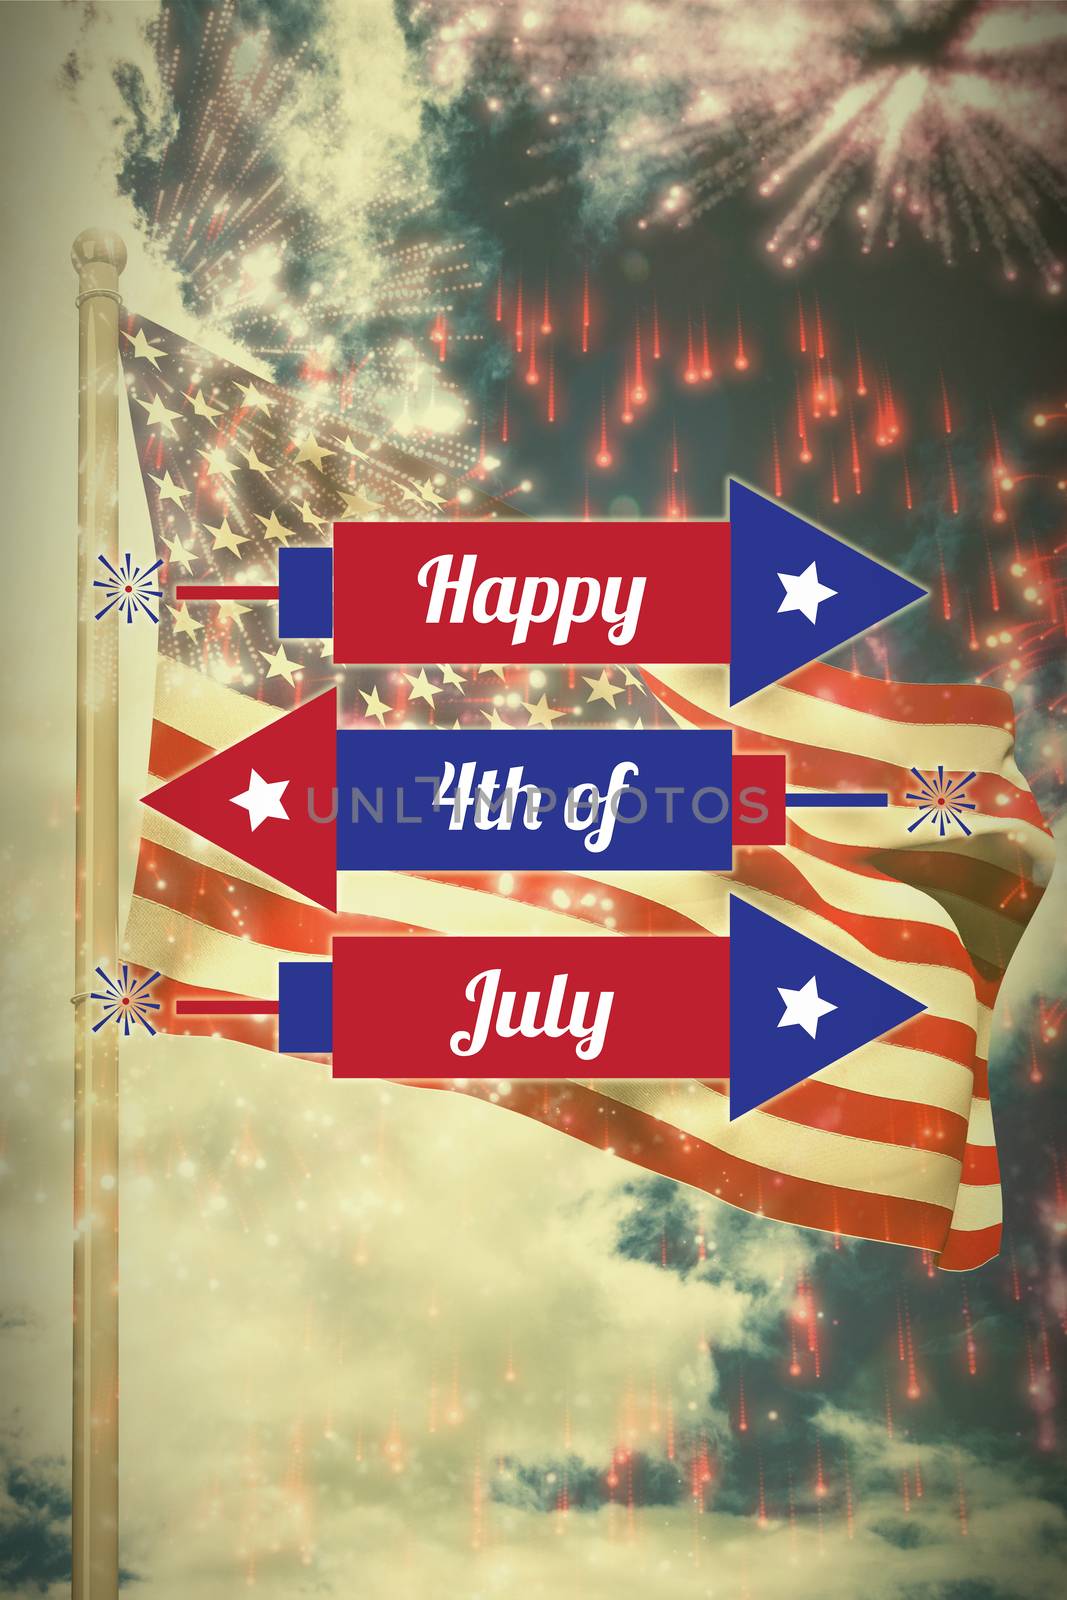 Composite image of digitally generated image of rockets with happy 4th of july text  by Wavebreakmedia